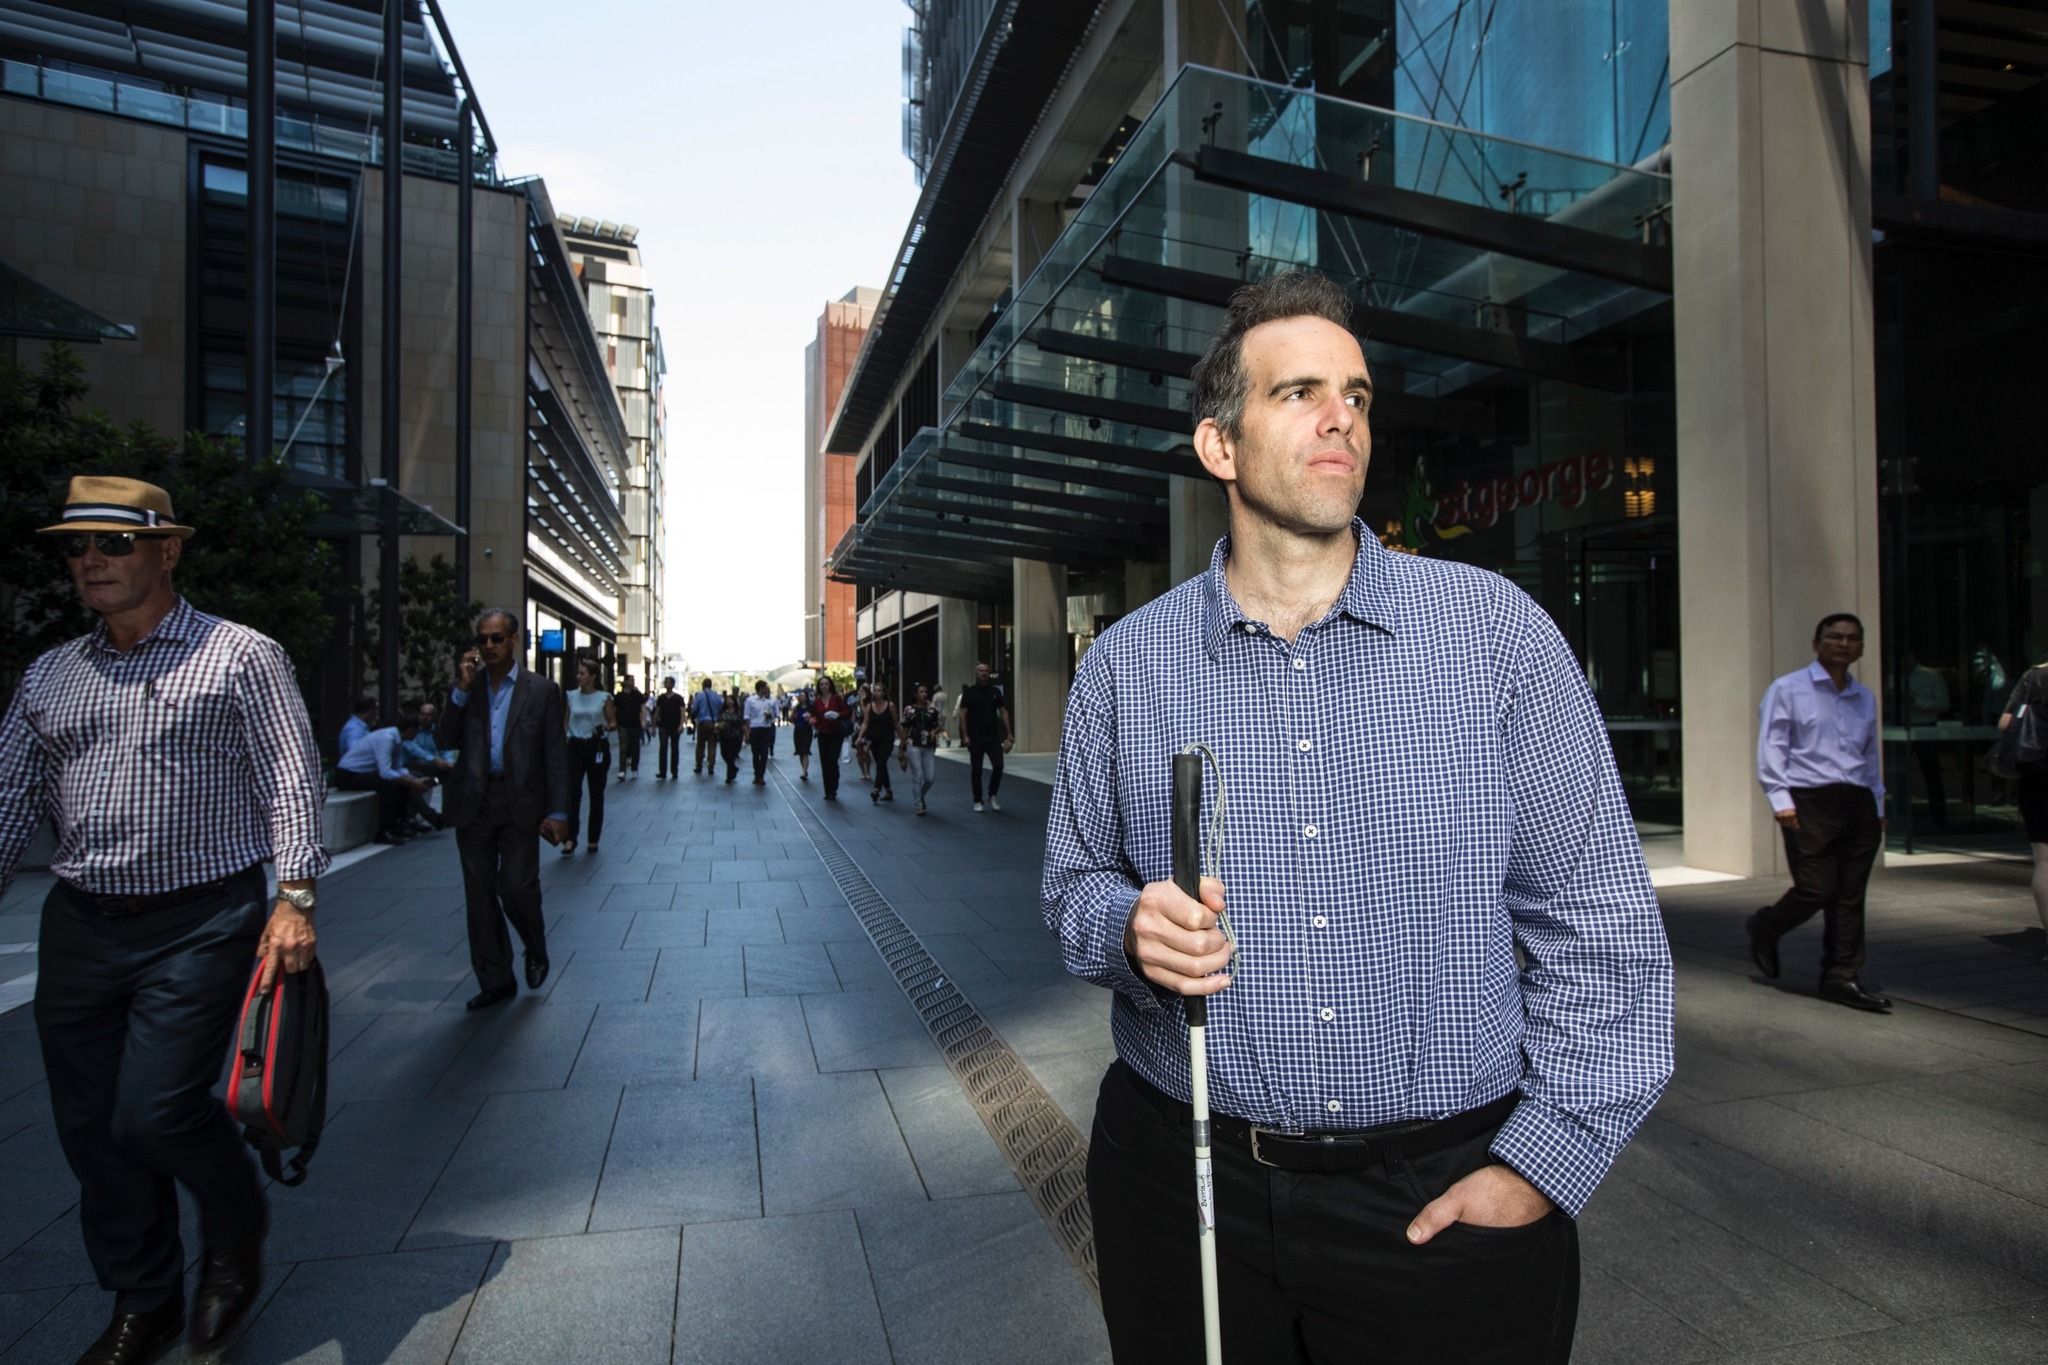 A picture of Rocco standing in the CBD holding a walking cane and with a hand in his pocket.